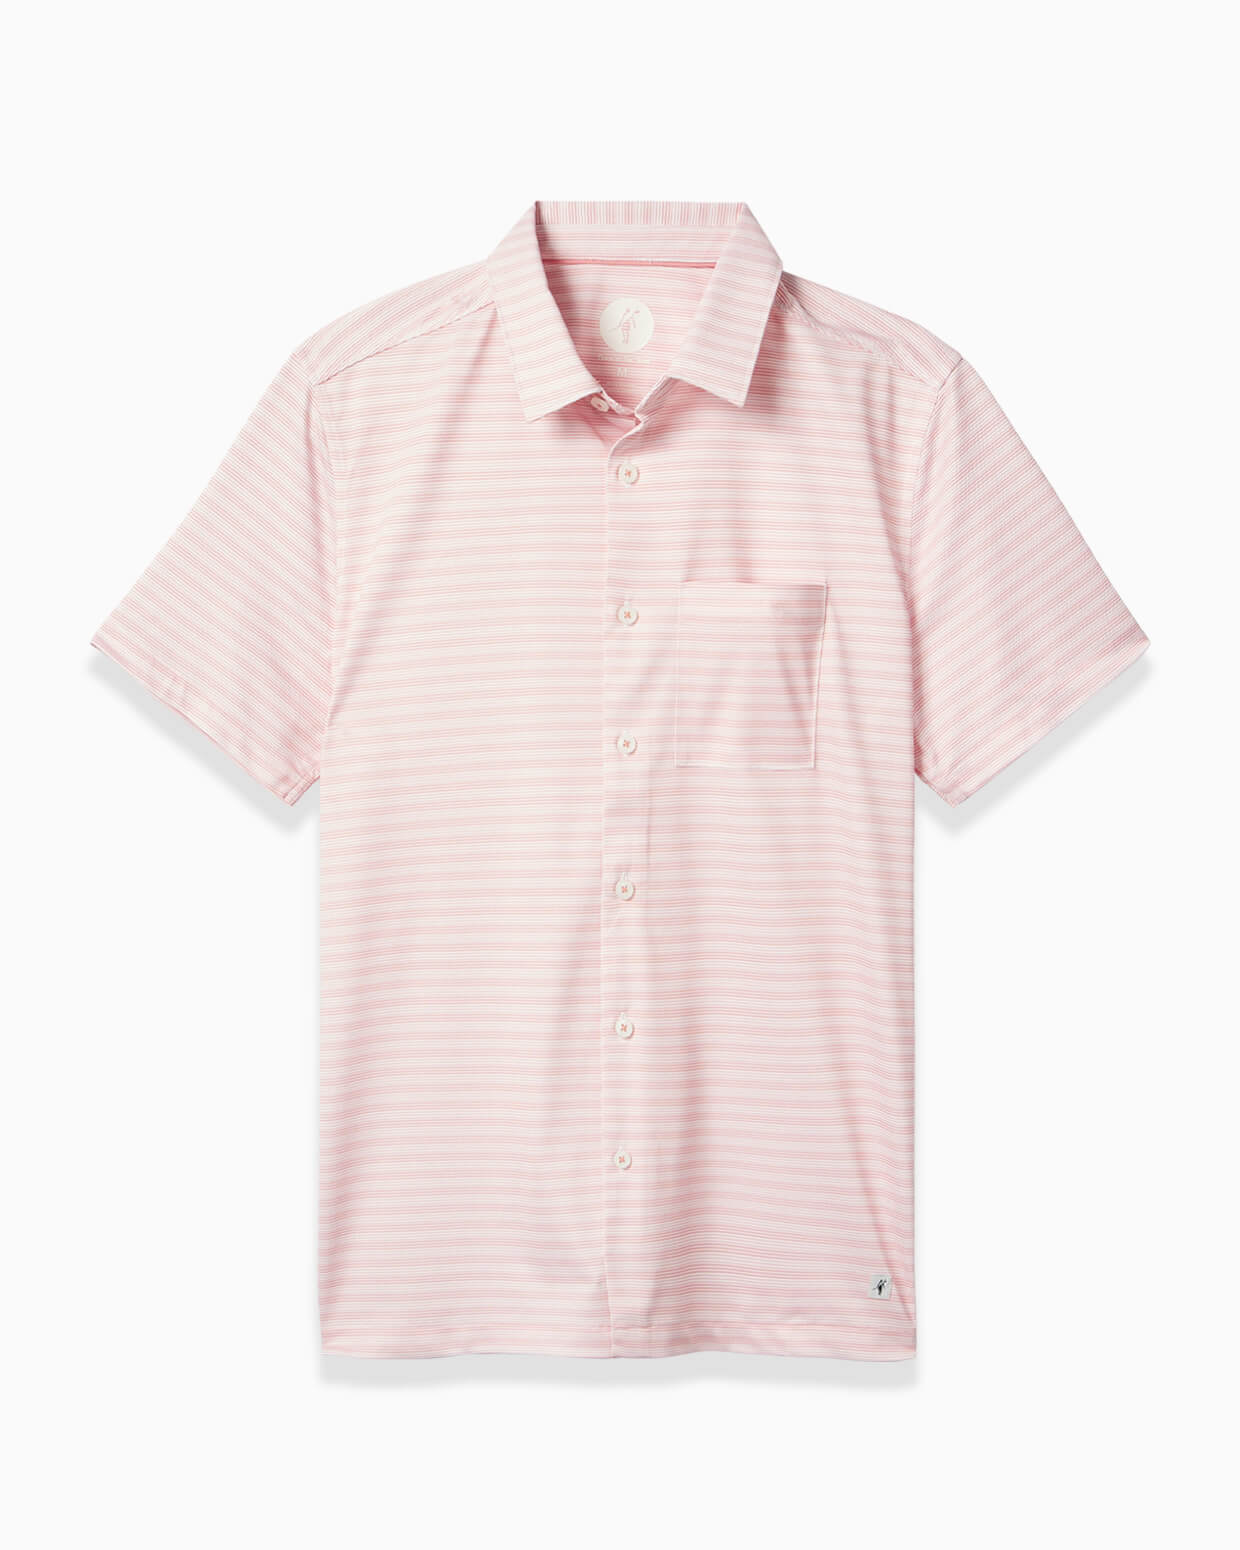 Toes on the Nose Myrtle Beach Short Sleeve Button Up